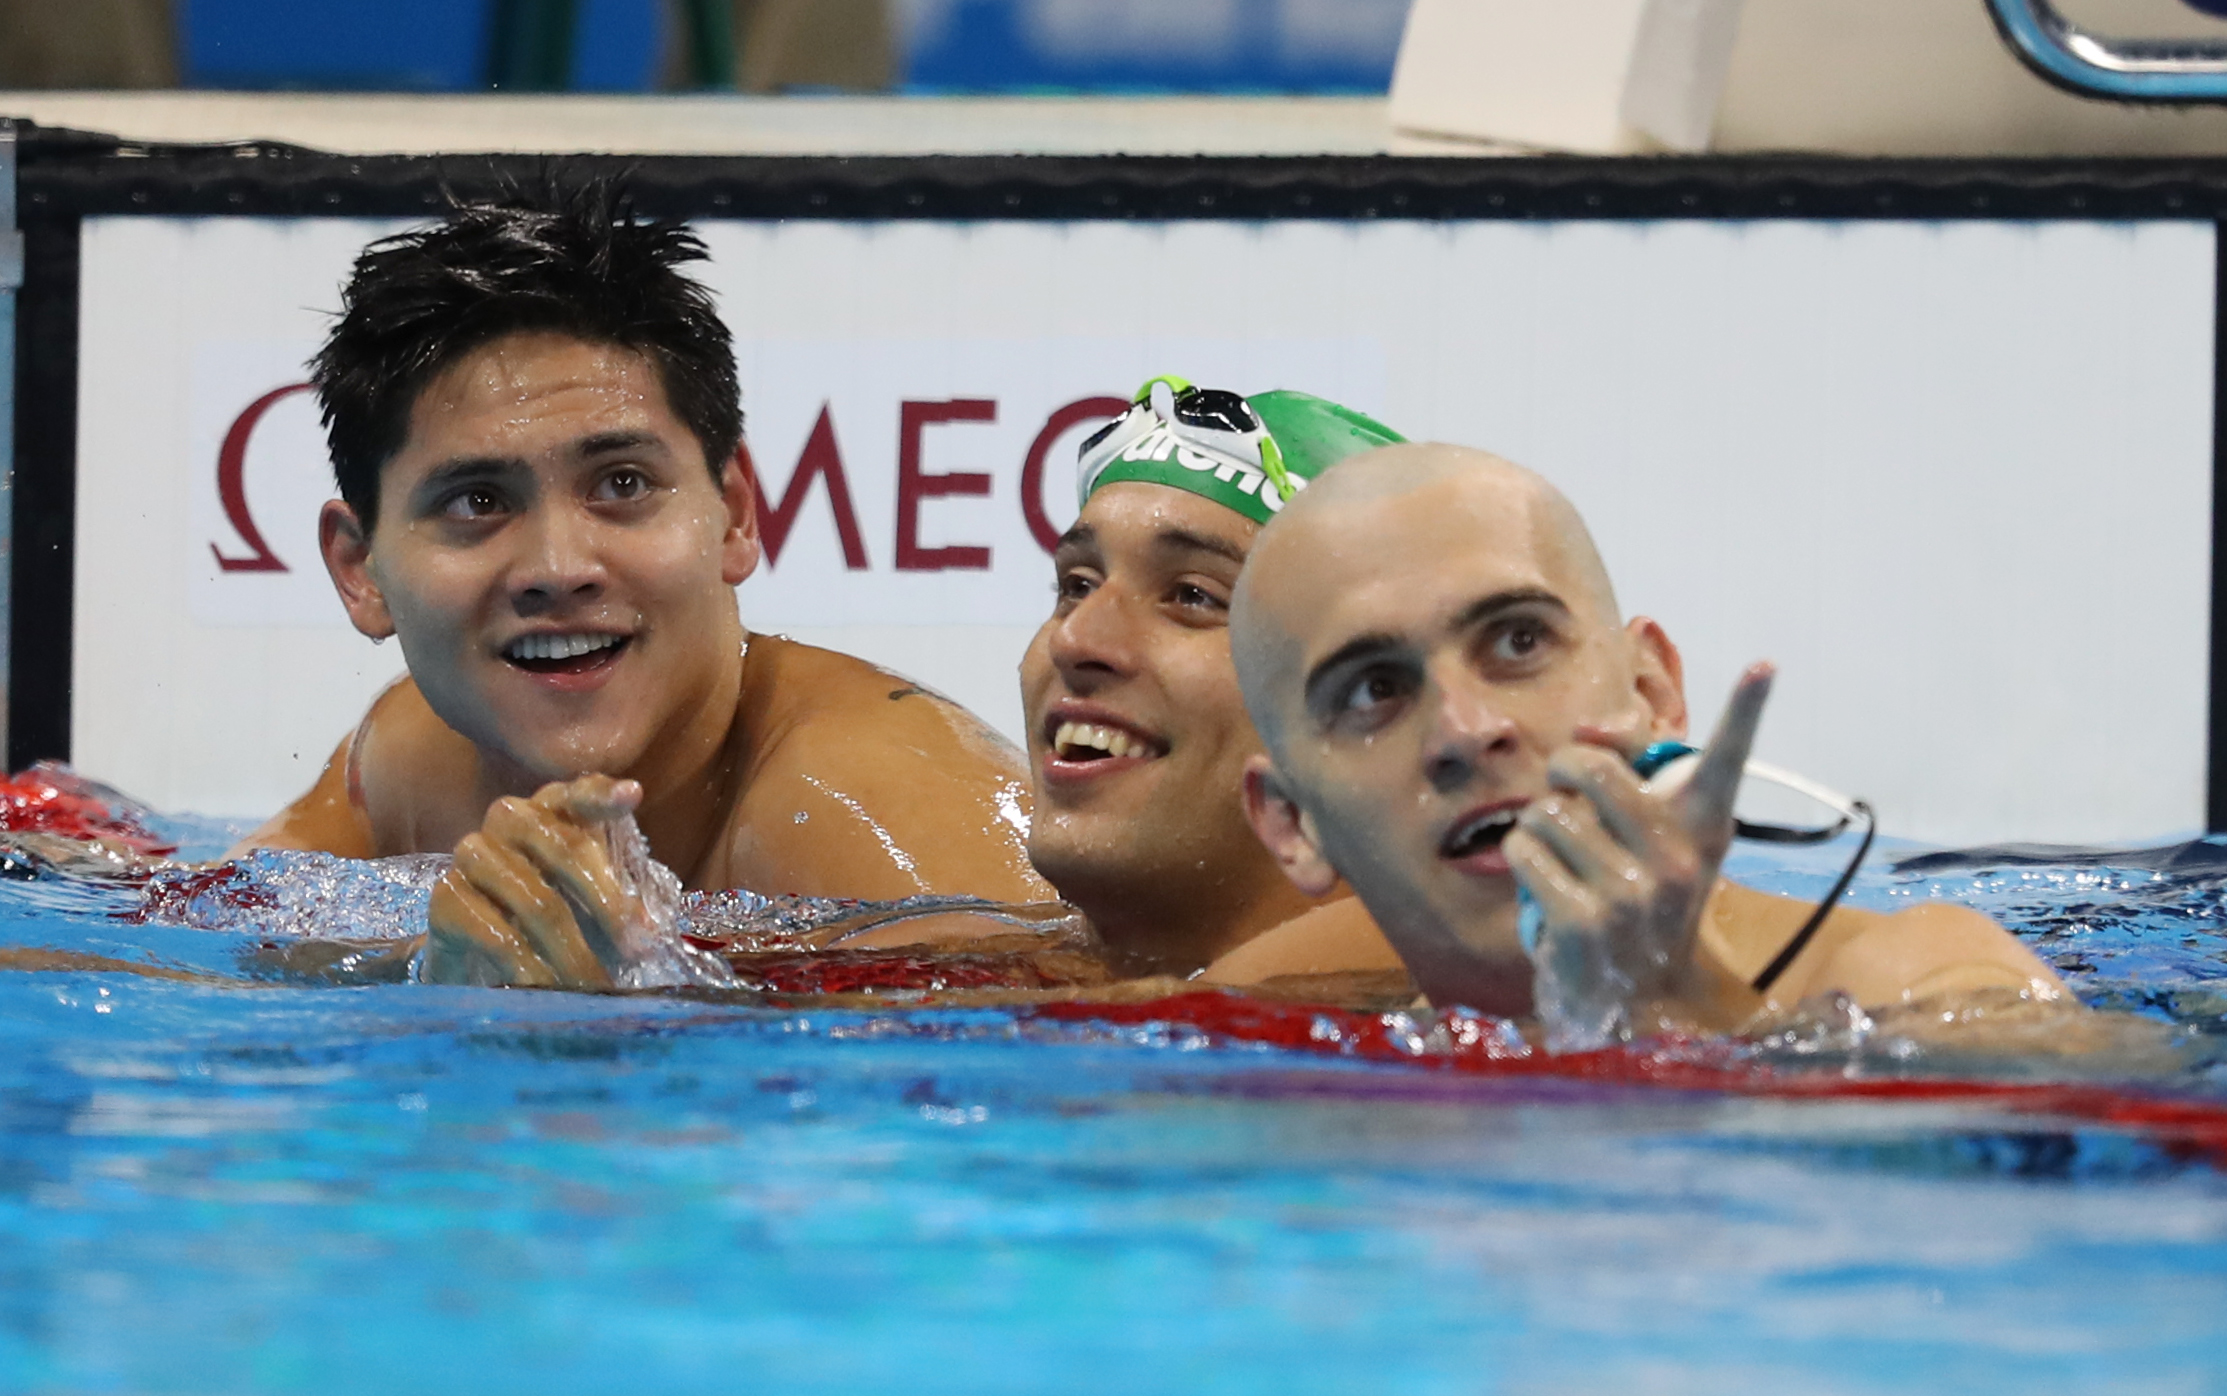 RIO DE JANEIRO, BRAZIL - AUGUST 12: Joseph Schooling of Singapore celebrates winning the Men's 100m Butterfly with Chad Le Clos and Laszlo Cseh on Day 7 of the Rio 2016 Olympic Games at the Olympic Aquatics Stadium on August 12, 2016 in Rio de Janeiro, Brazil. (Photo by Ian MacNicol/Getty Images)